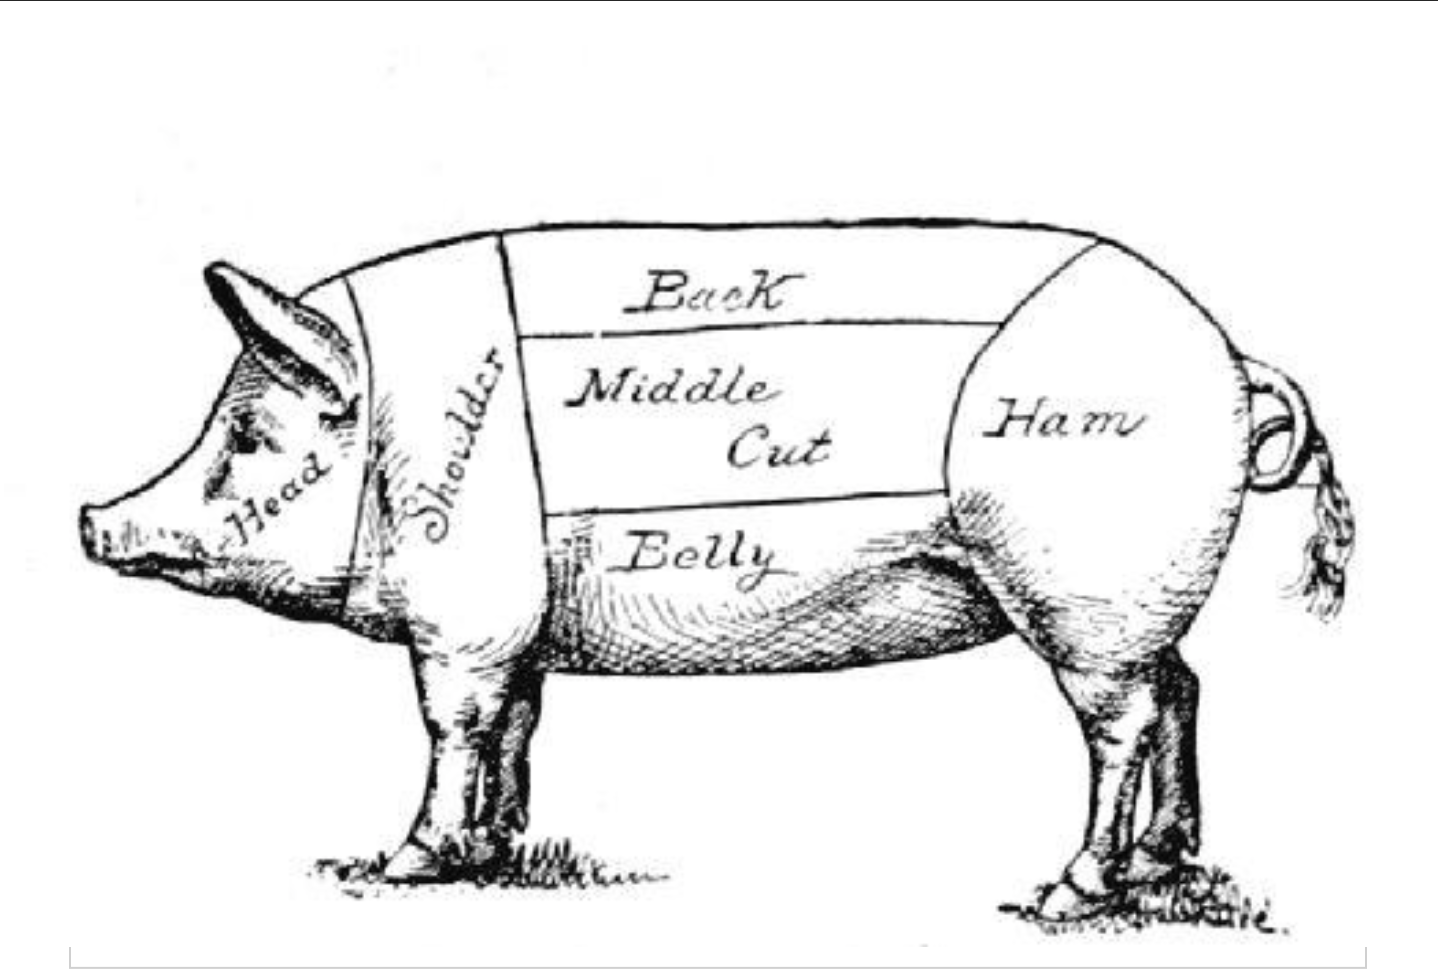 Vintage black and white image of pig with text describing the different cuts.